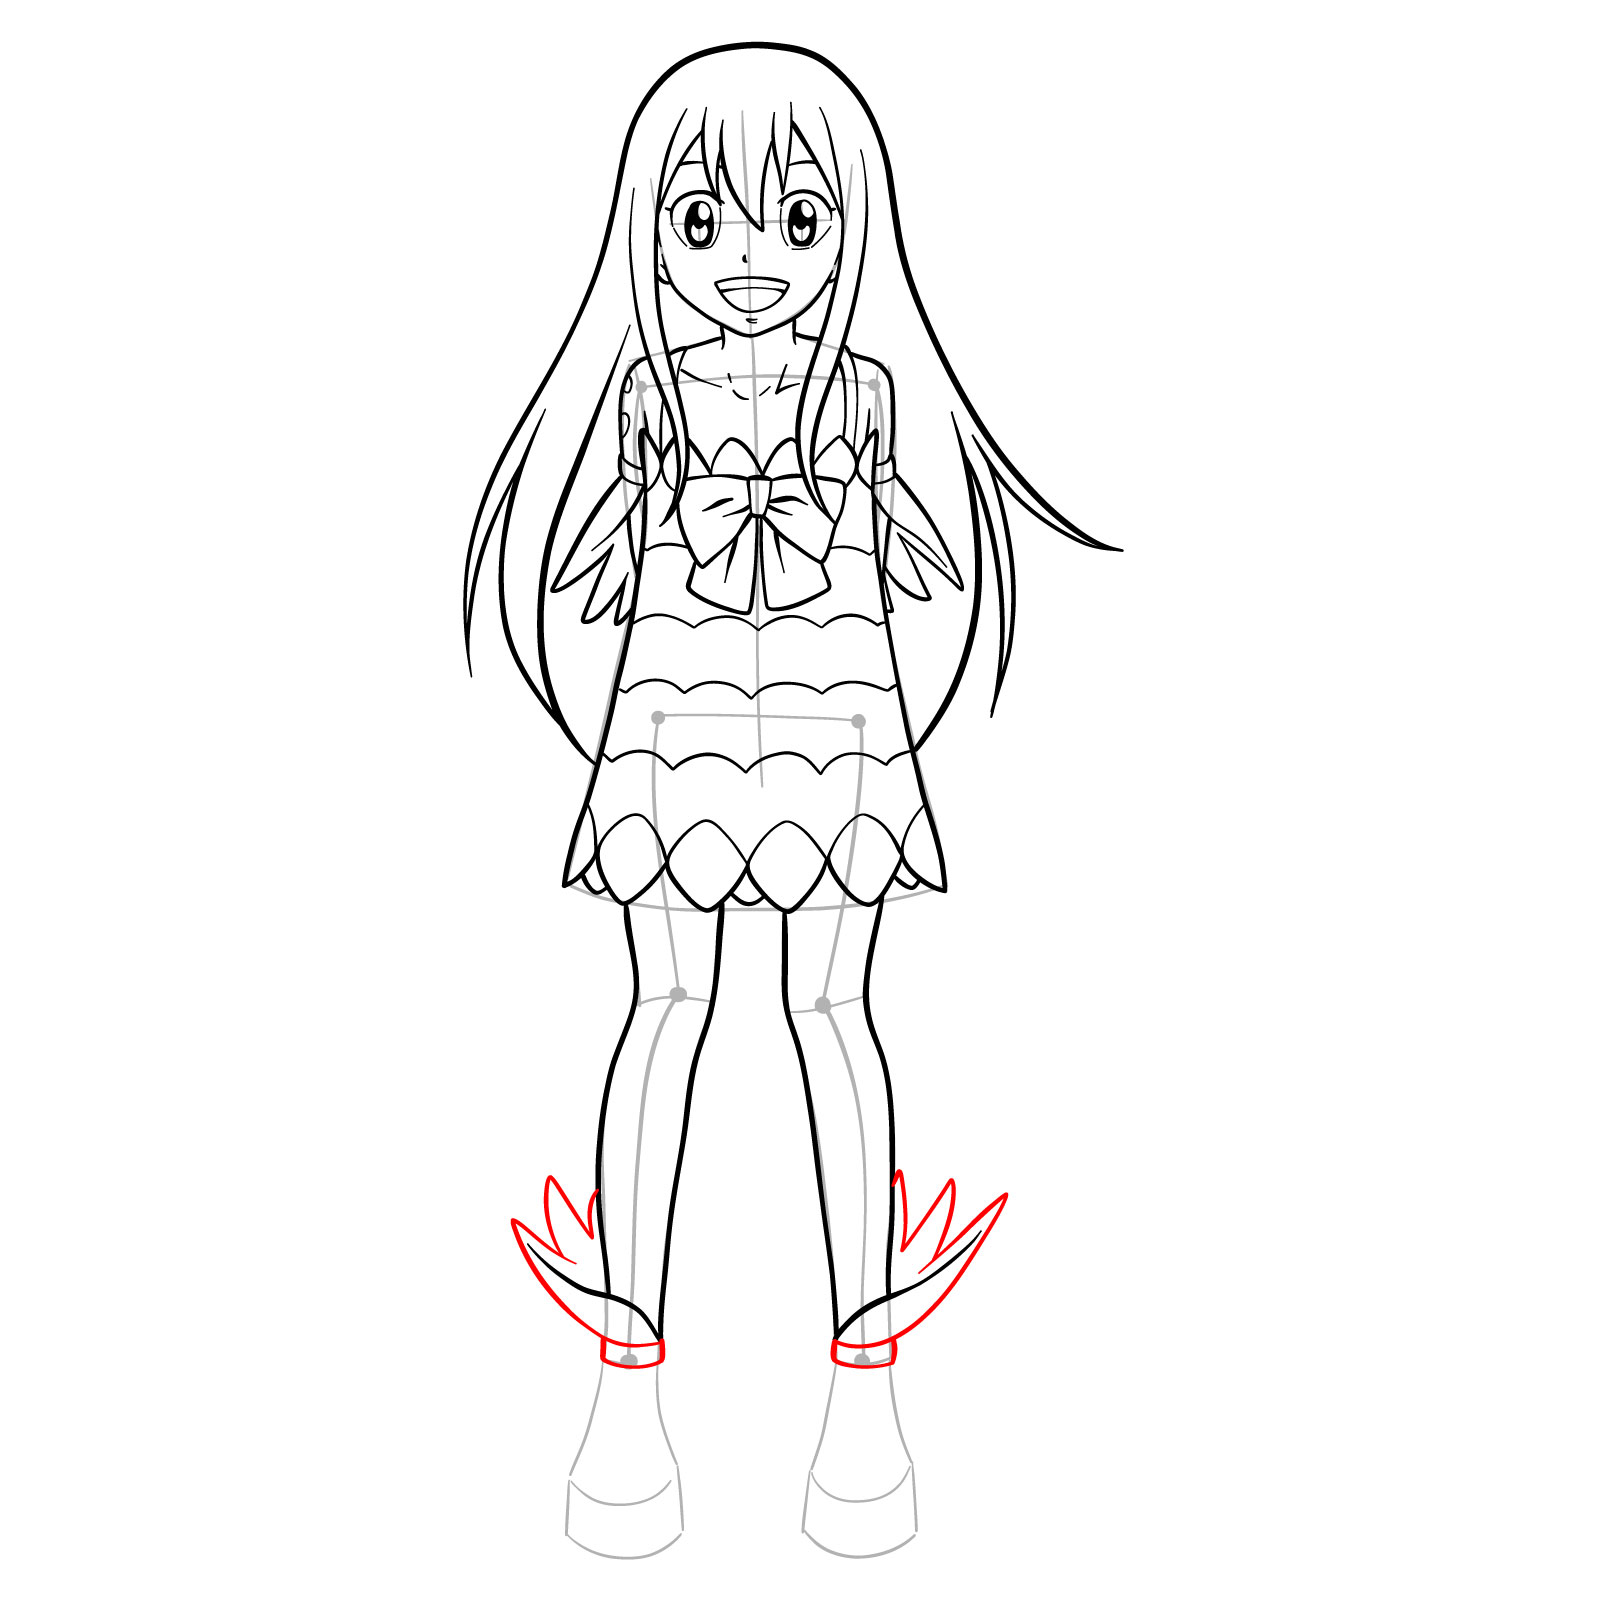 How to draw Wendy Marvell from Fairy Tail - step 21